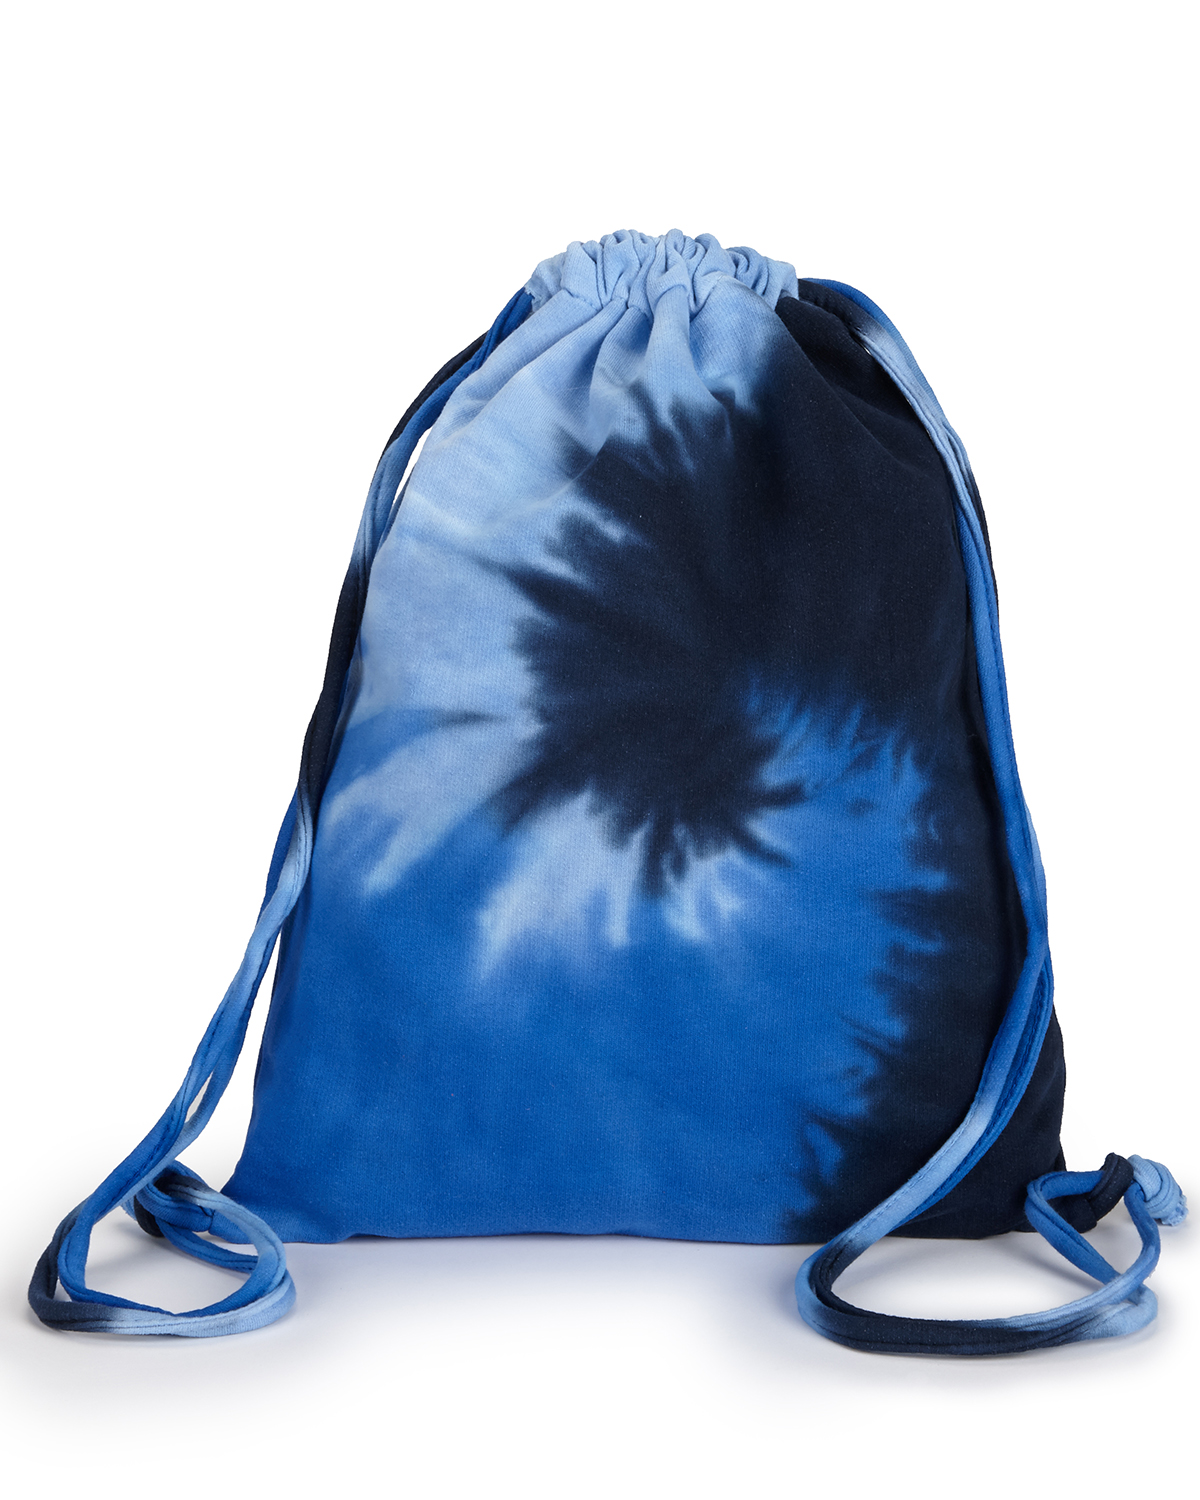 Tie-Dyed CD9500 - Swirl Tie-Dyed Sport Pack